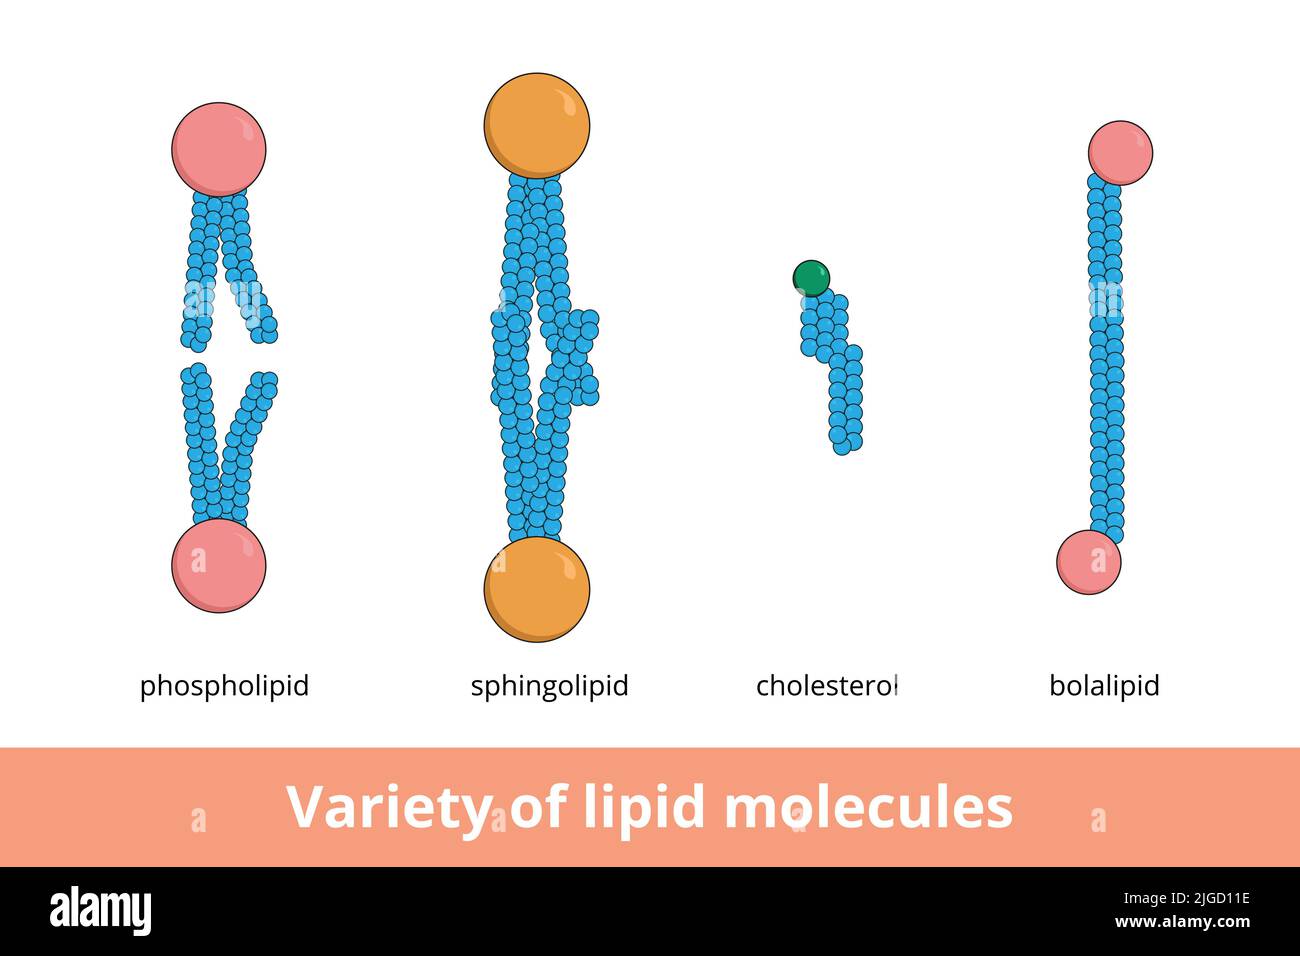 Variety of lipid molecules. Shapes of lipid molecules forming biological membranes, including phospholipid, sphingolipid, cholesterol and bolalipid. Stock Vector